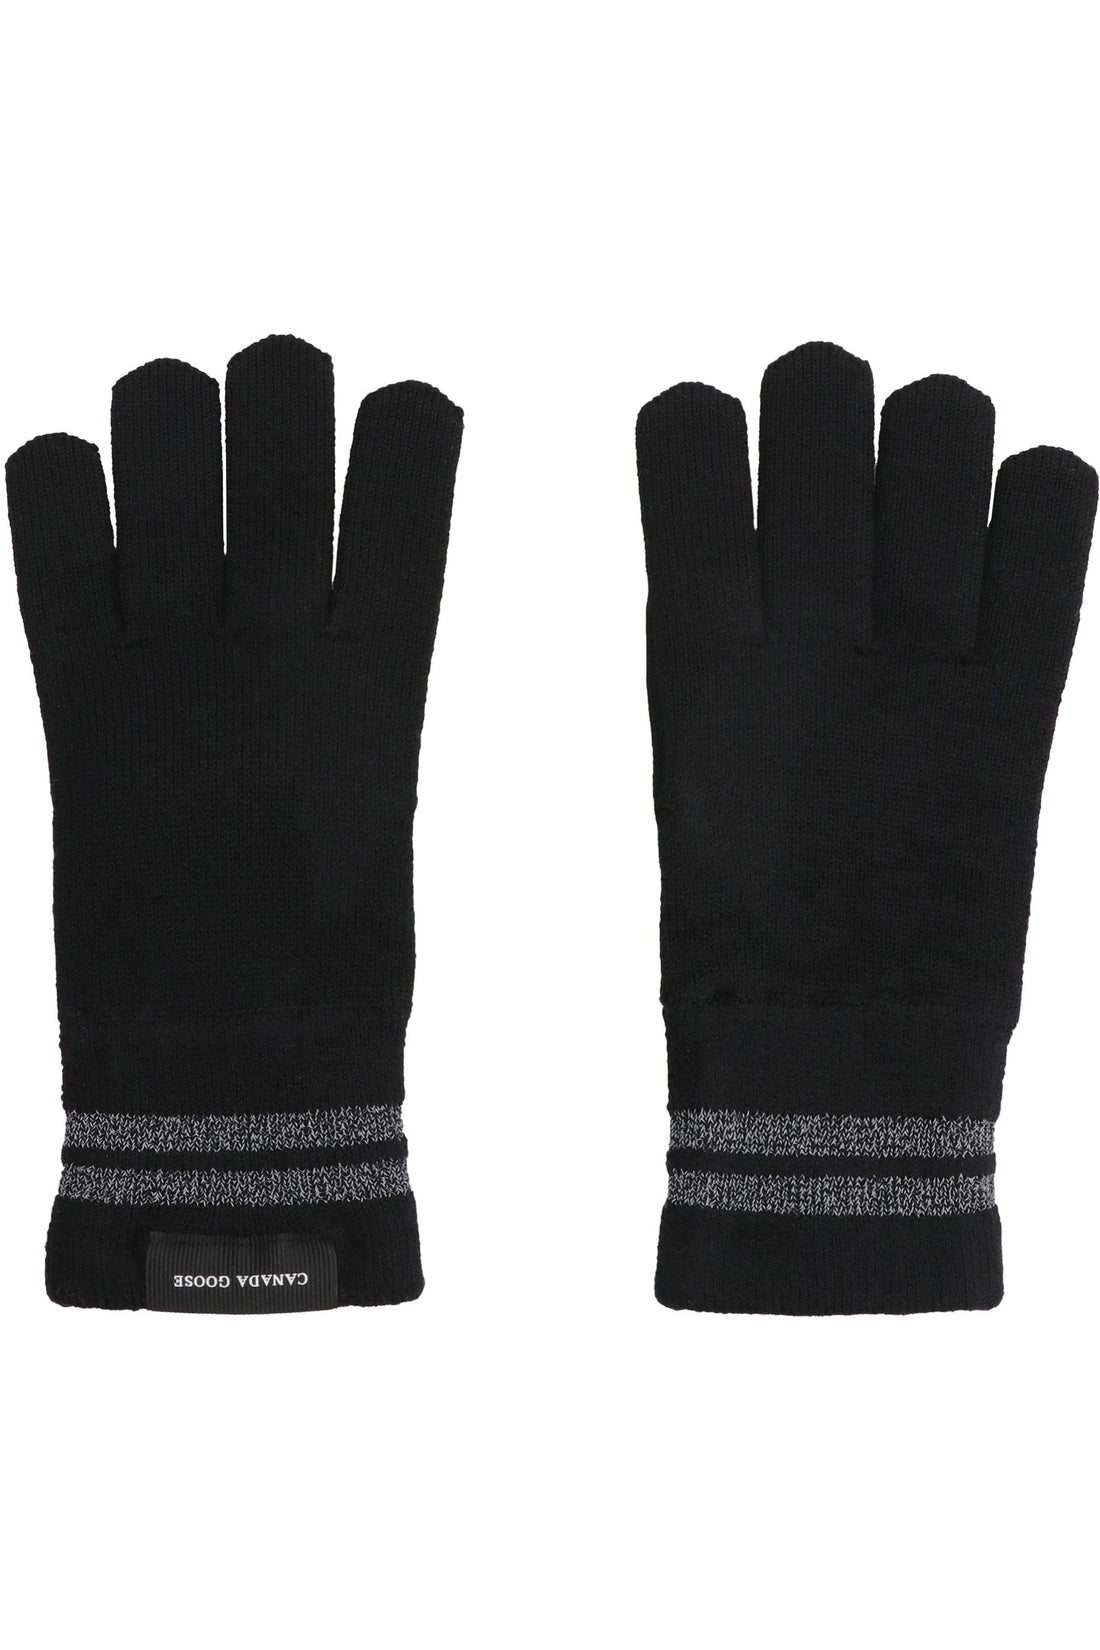 Canada Goose-OUTLET-SALE-Knitted gloves-ARCHIVIST